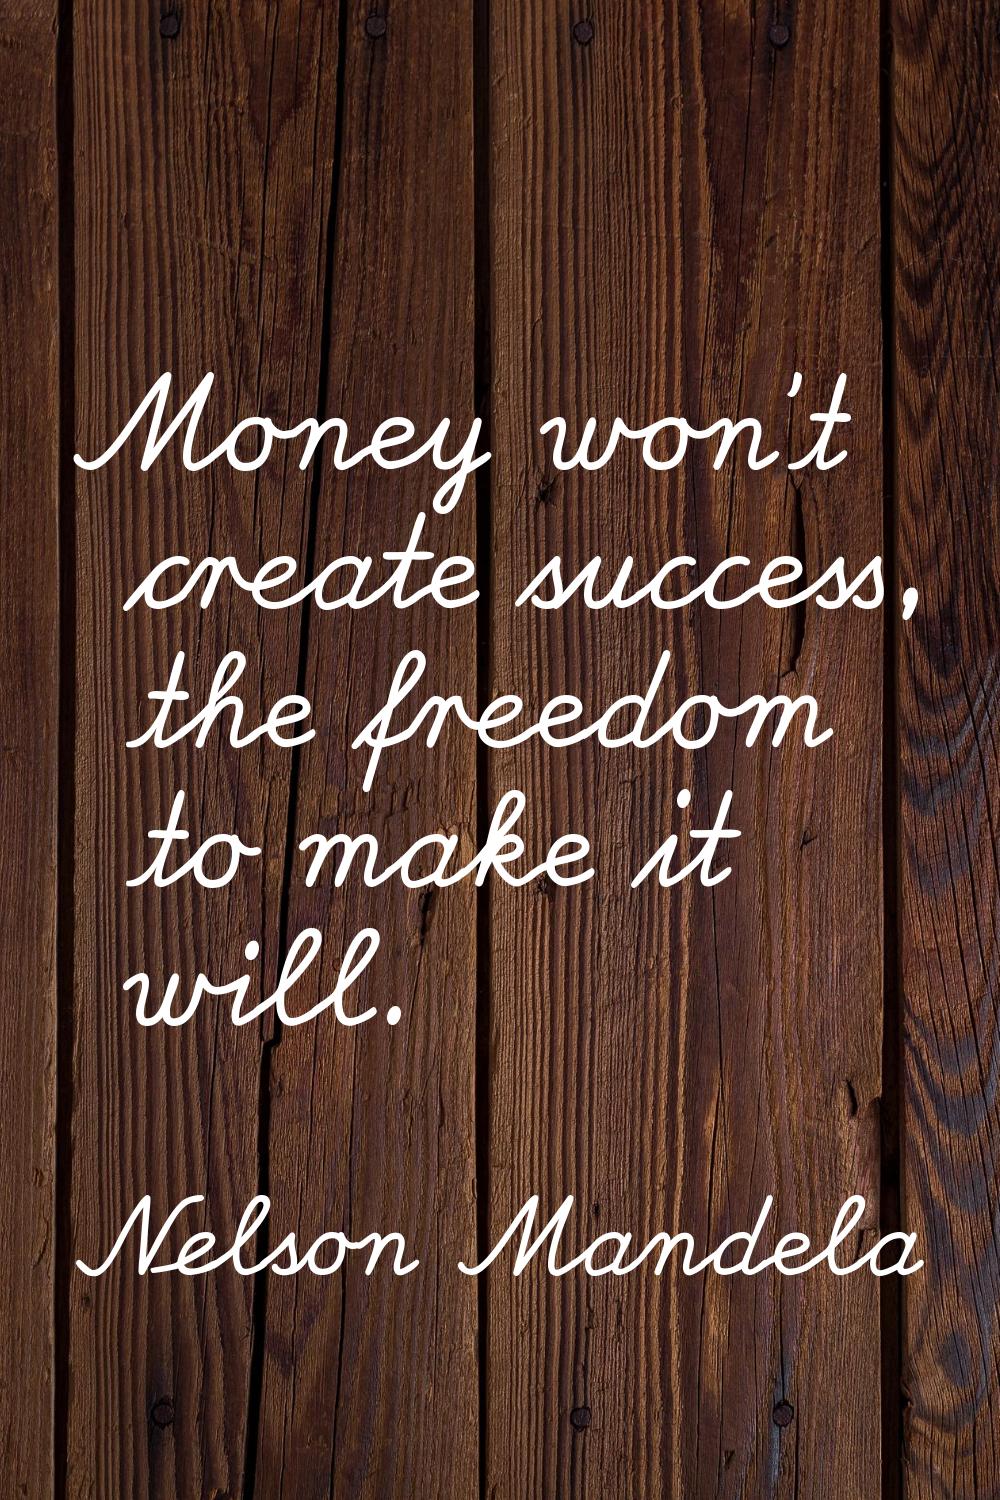 Money won't create success, the freedom to make it will.